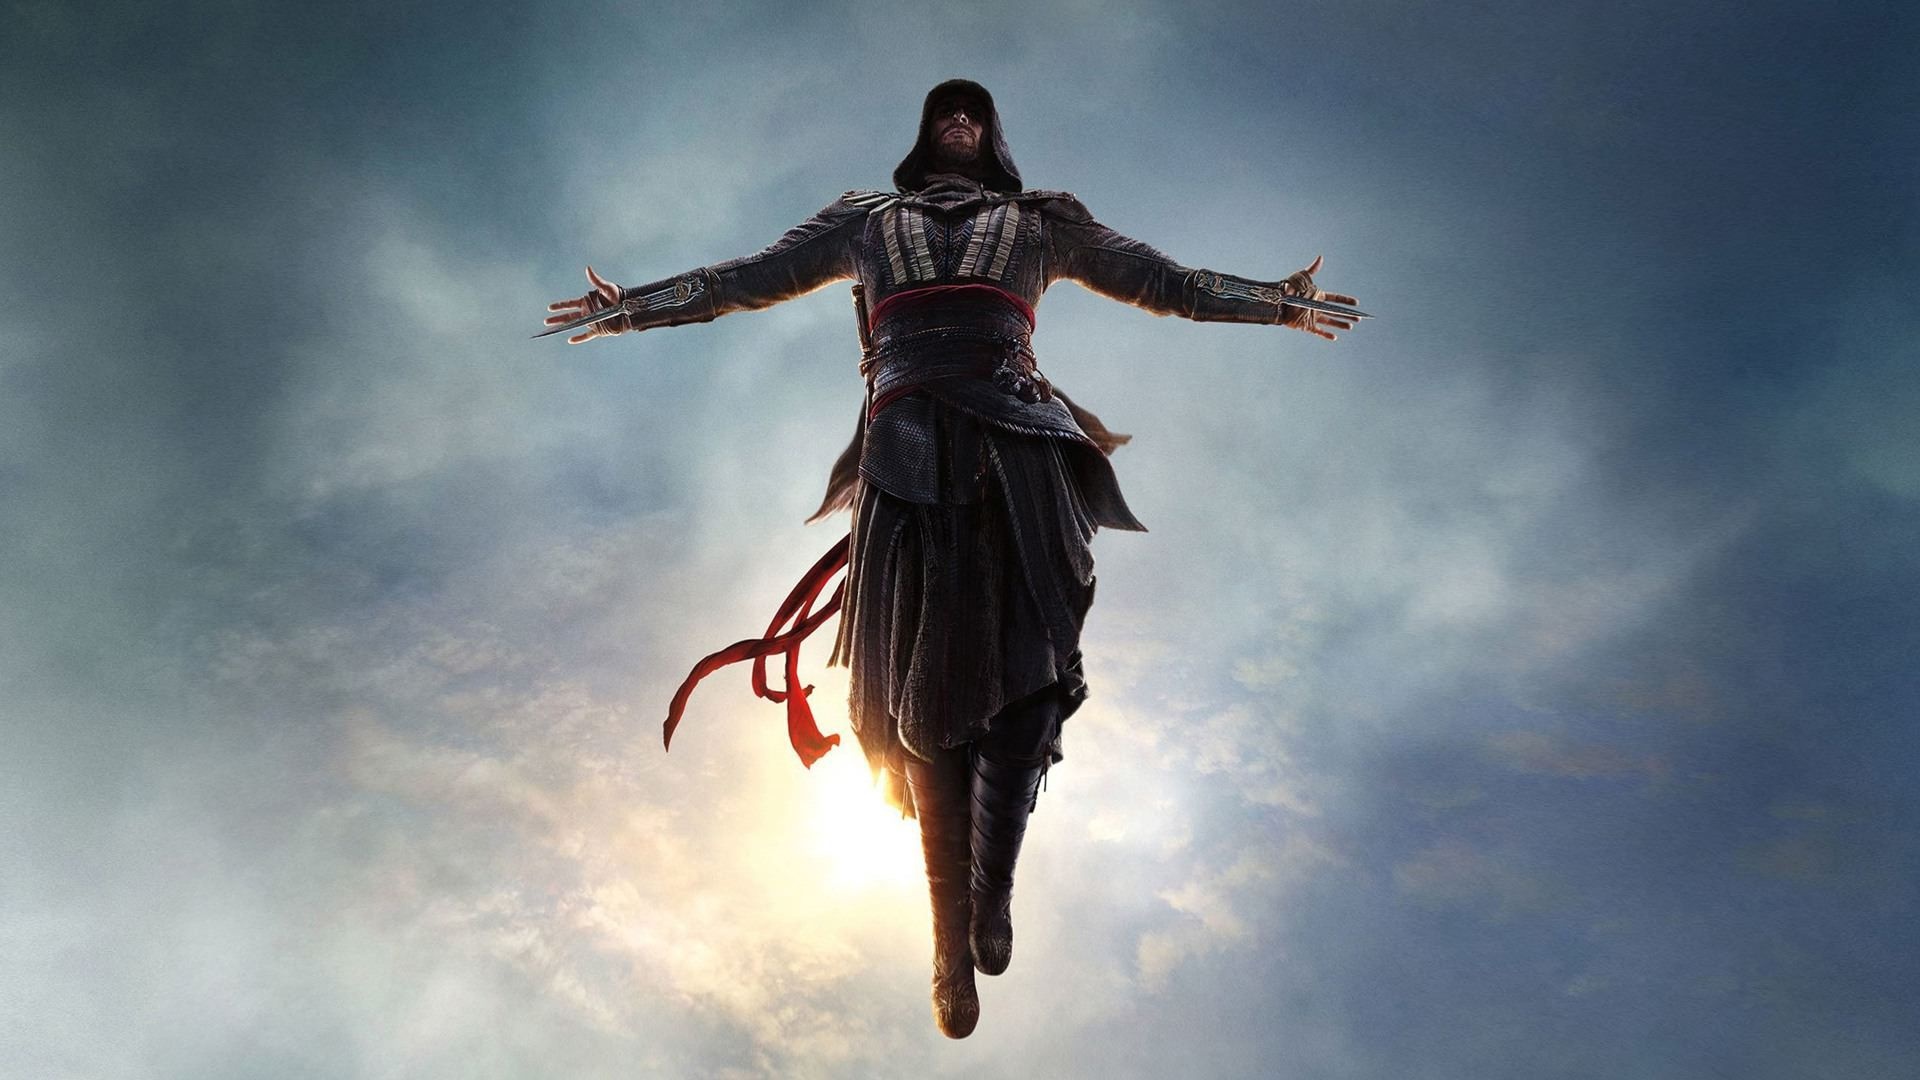 Michael Fassbender, Leap of faith, Thrilling wallpaper, Exciting Assassins Creed, 1920x1080 Full HD Desktop